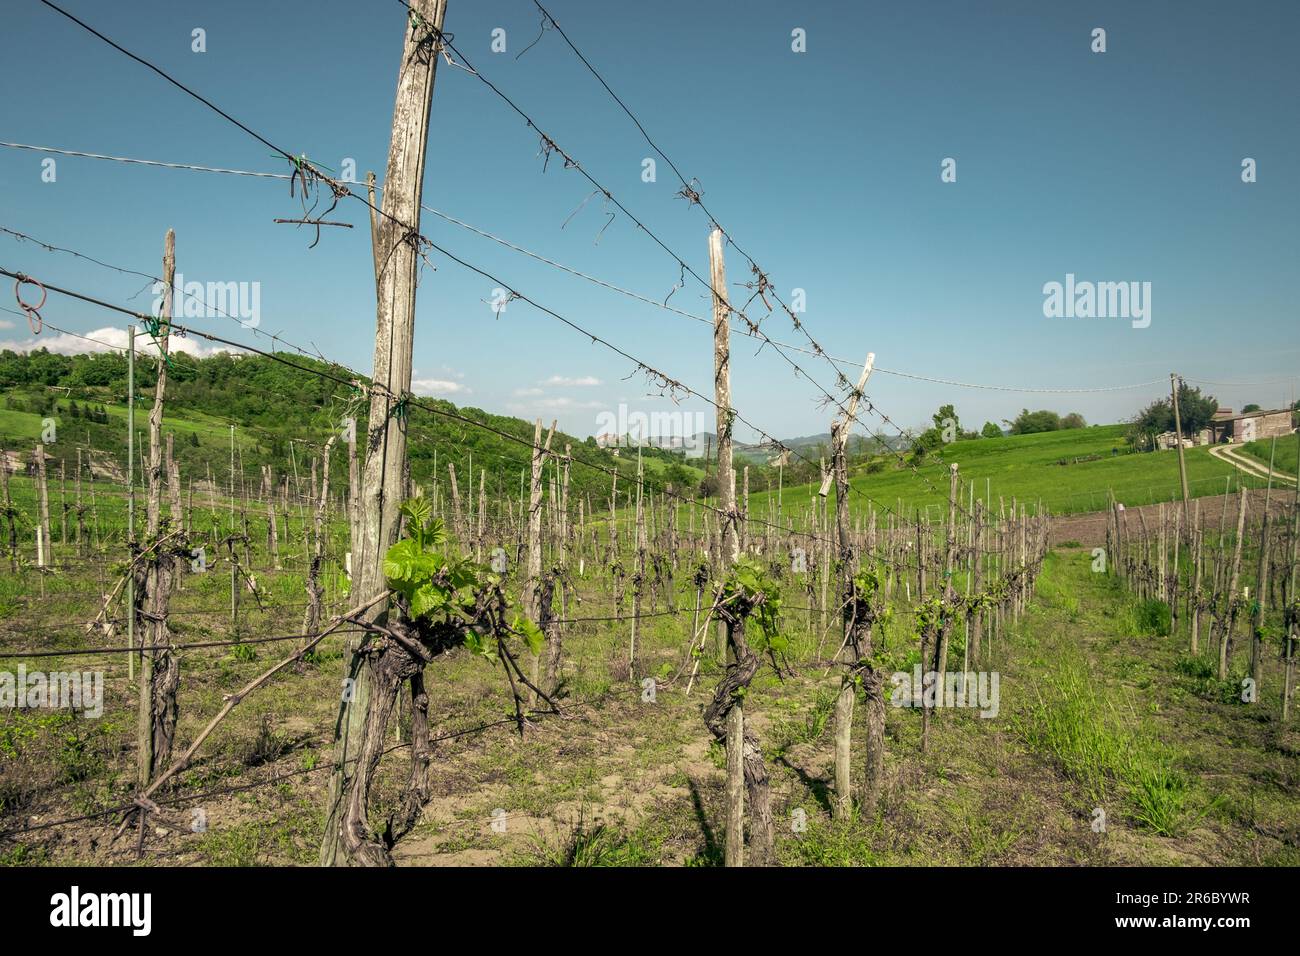 The vineyard in spring at Castello di Serravalle, province of Bologna, Emilia Romagna, Italy - The production area of the IGP wine called Pignoletto. Stock Photo